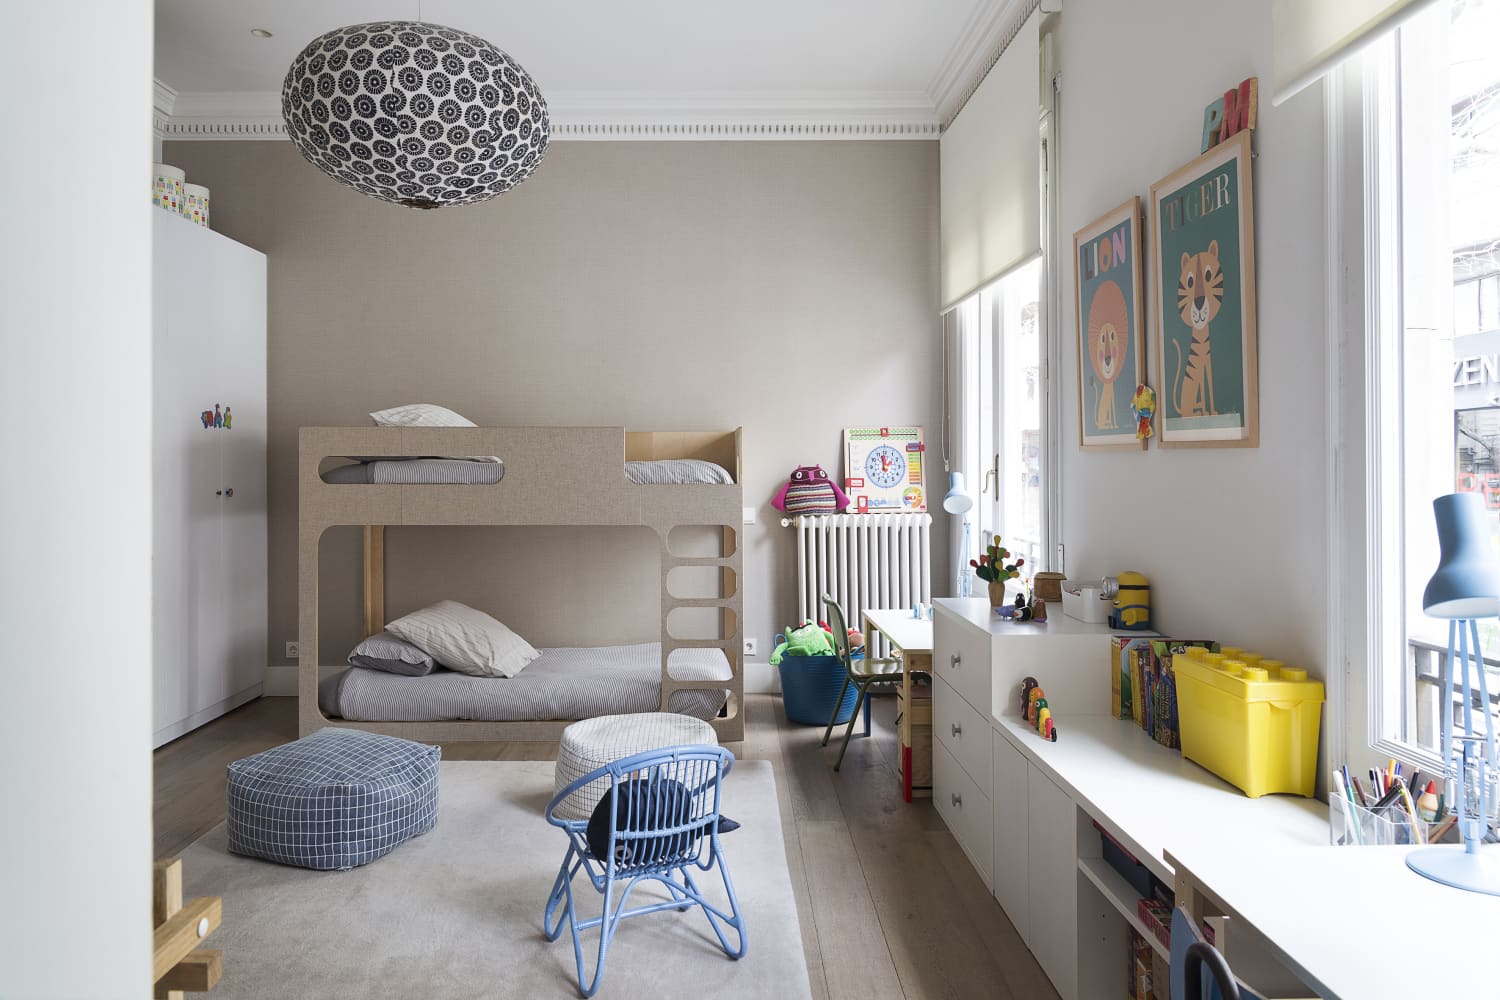 10 Low Bunk Beds Perfect for Toddlers Making the Transition to Big Kid Beds